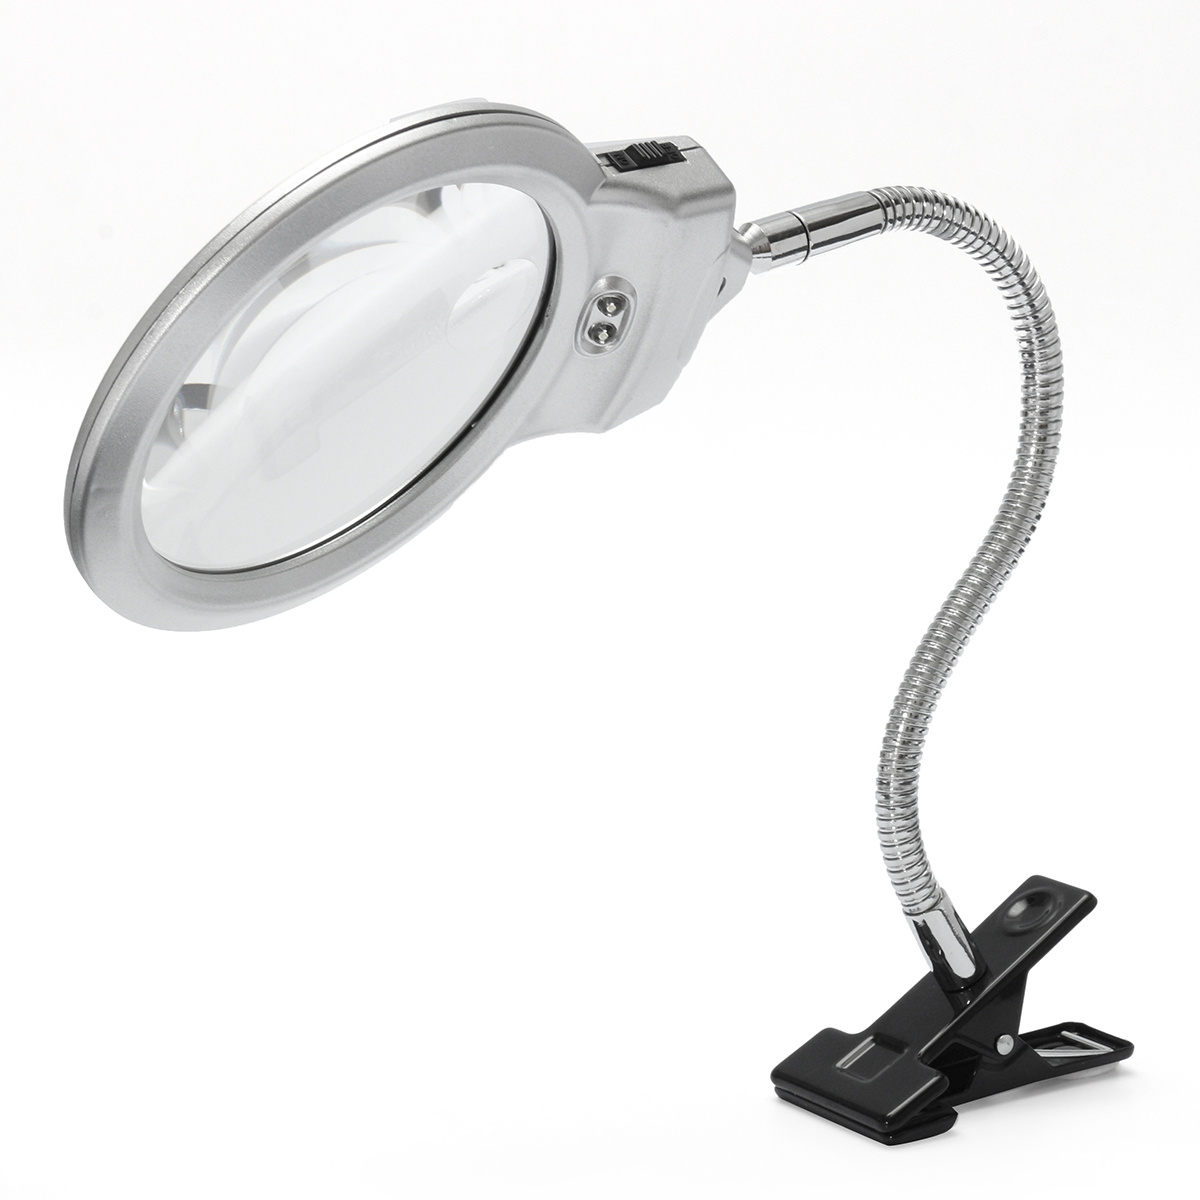 New-25-x-90MM-5-x-22MM-2-LED-Lighted-Table-Top-Desk-Magnifier-Magnifying-Glass-with-Clamp-1075605-8